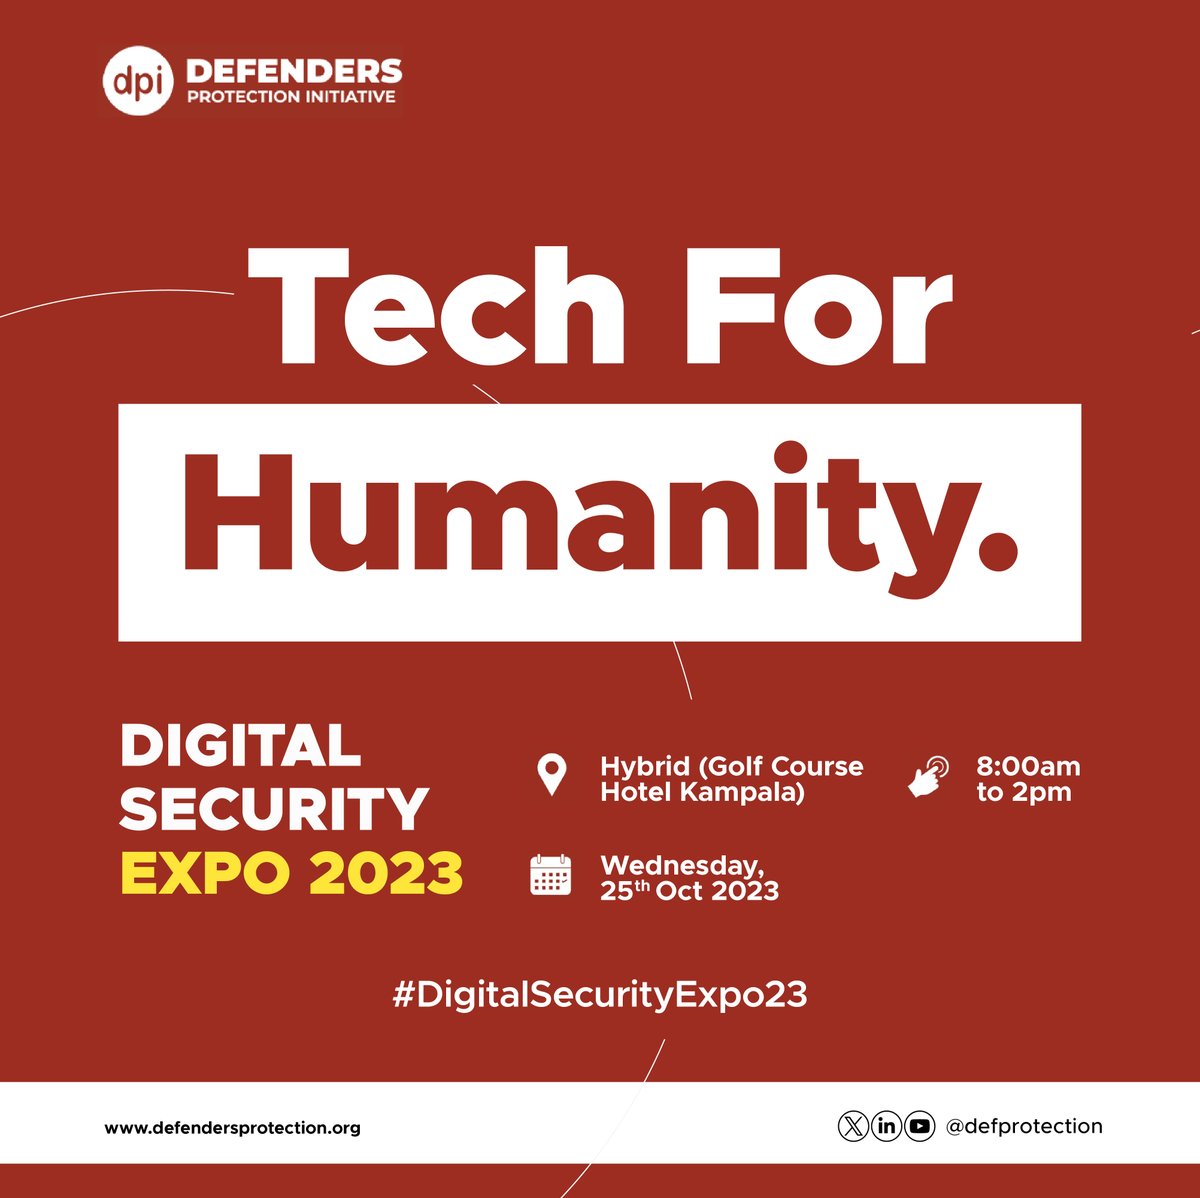 The digital world is ever-evolving, bringing new trends, innovations, and security risks. Join us at the #DigitalSecurityExpo23 to gain insights on harnessing technology to advance human rights, and fortifying your digital resilience against threats. Don't miss out!